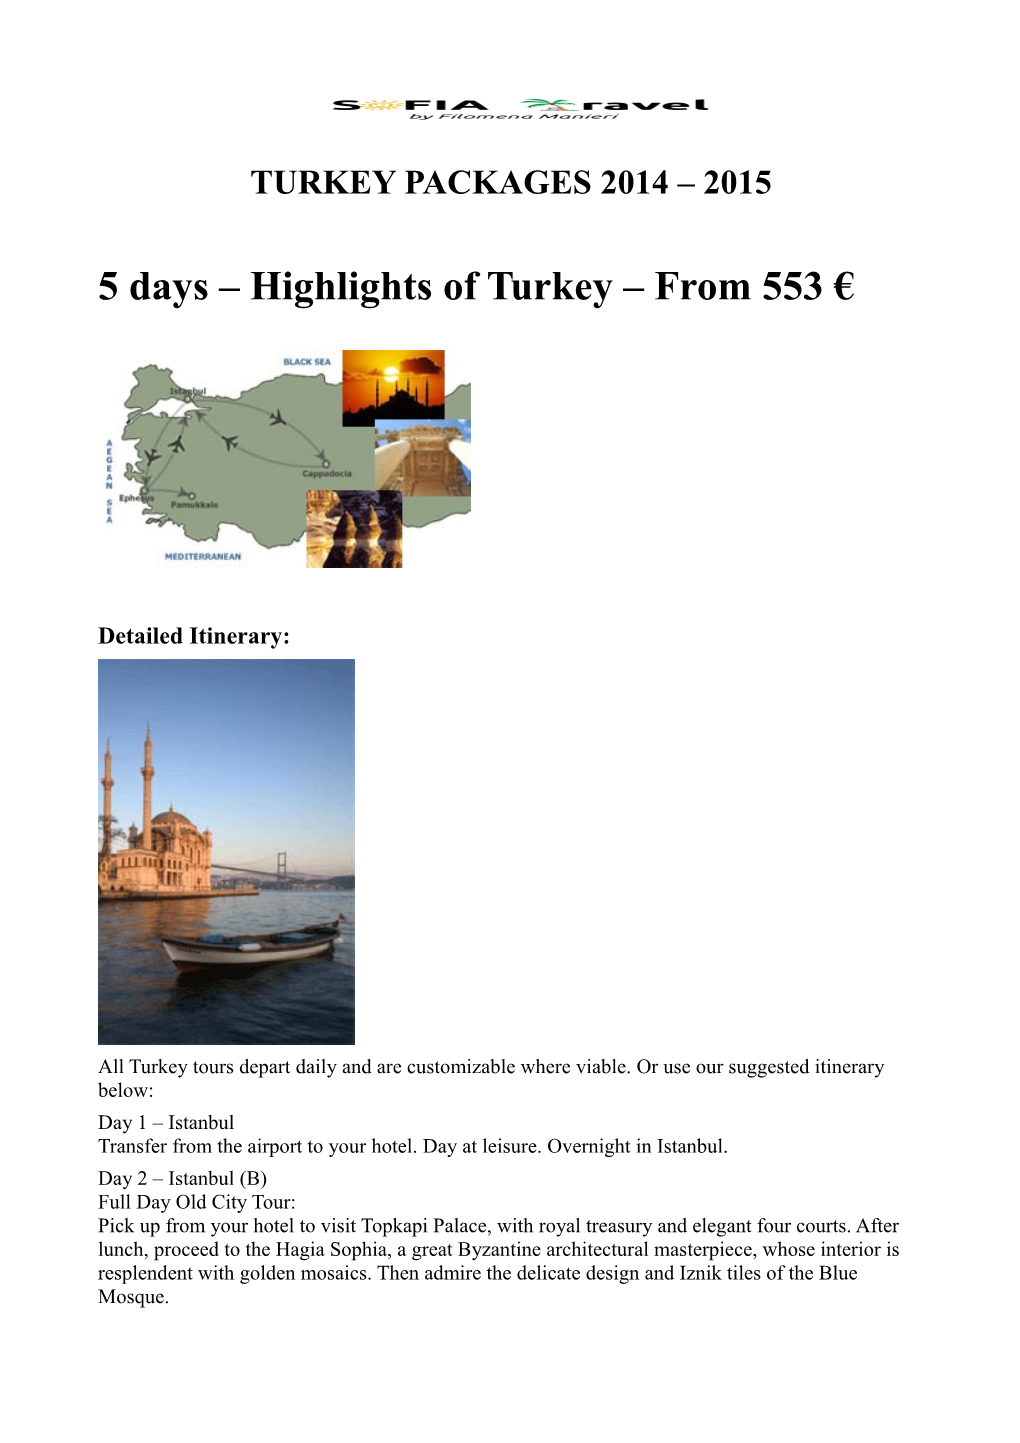 5 Days Highlights of Turkey from 553